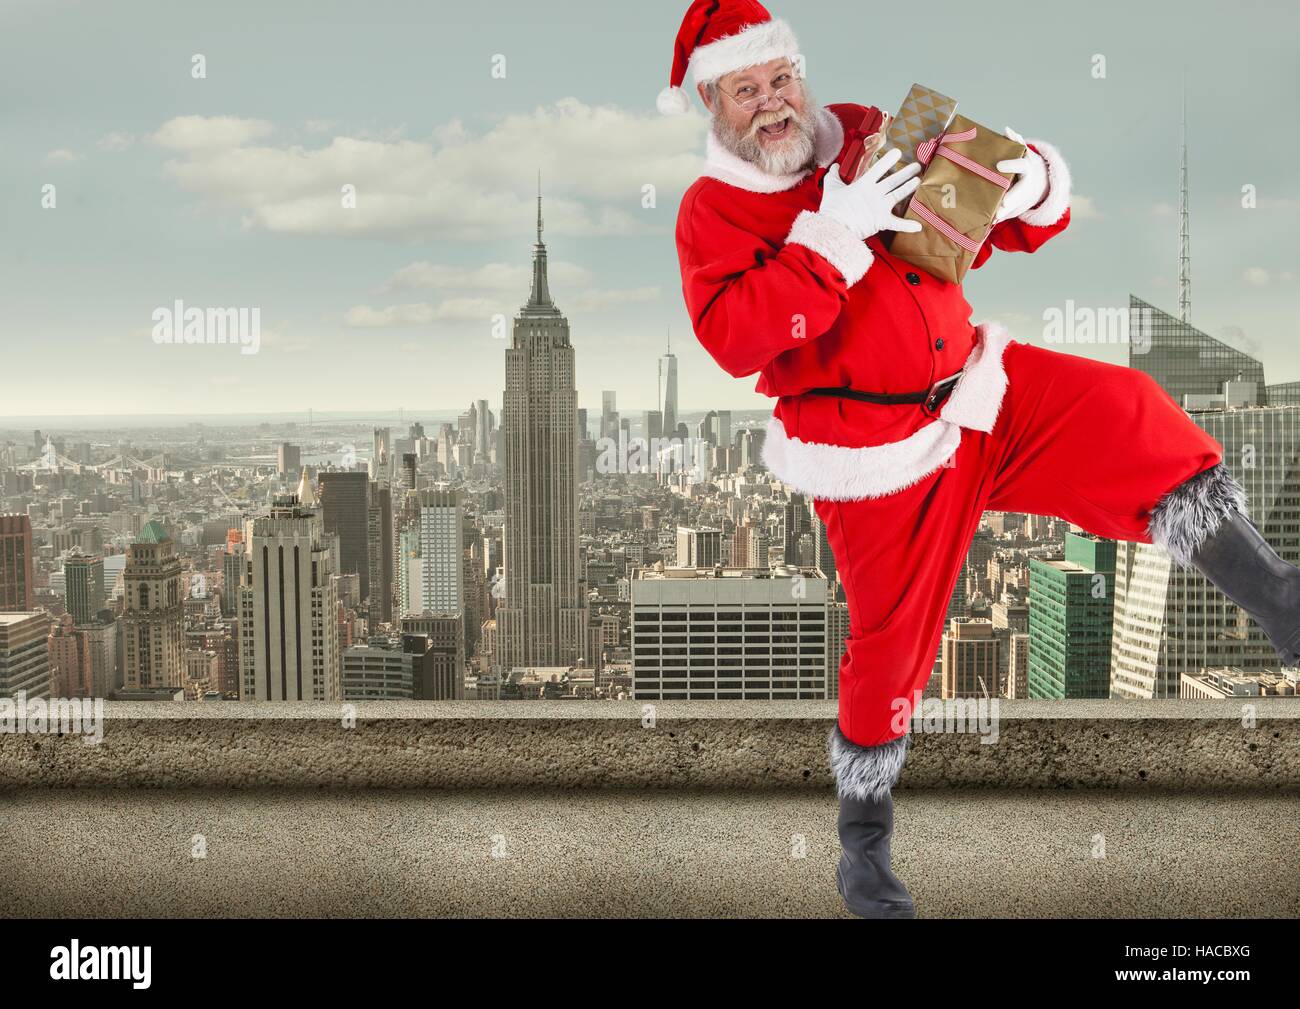 Santa claus  holding gift boxes standing on balcony of a building Stock Photo